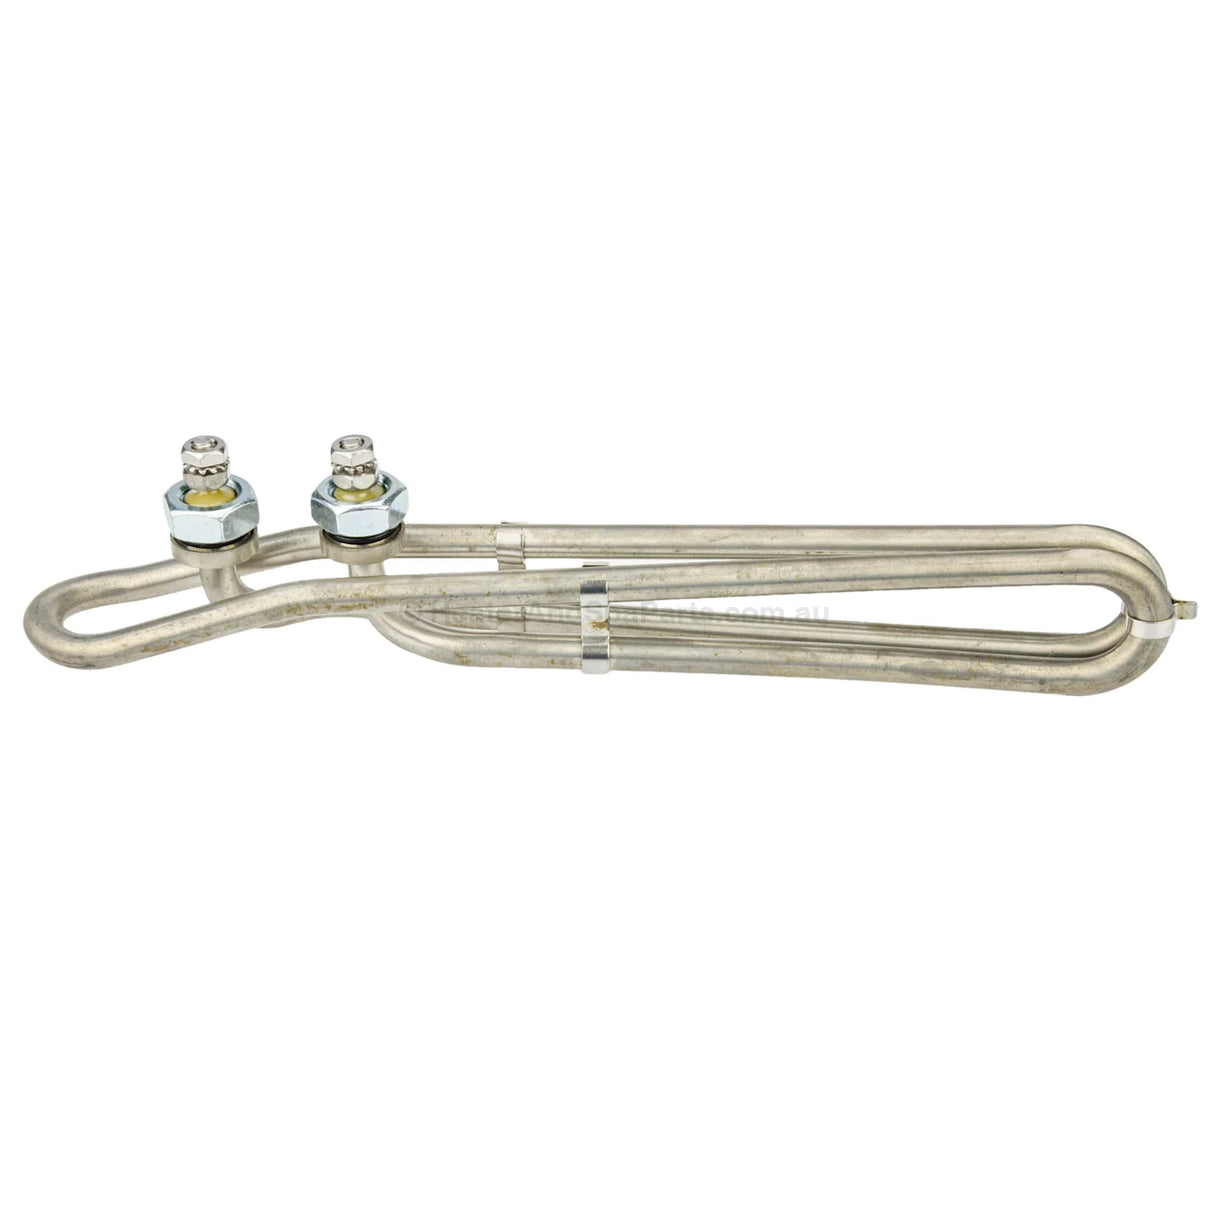 5kw / 5.5kW Universal 10" Spa Heater Element - Balboa, Hydroquip, Gecko - Heater and Spa Parts